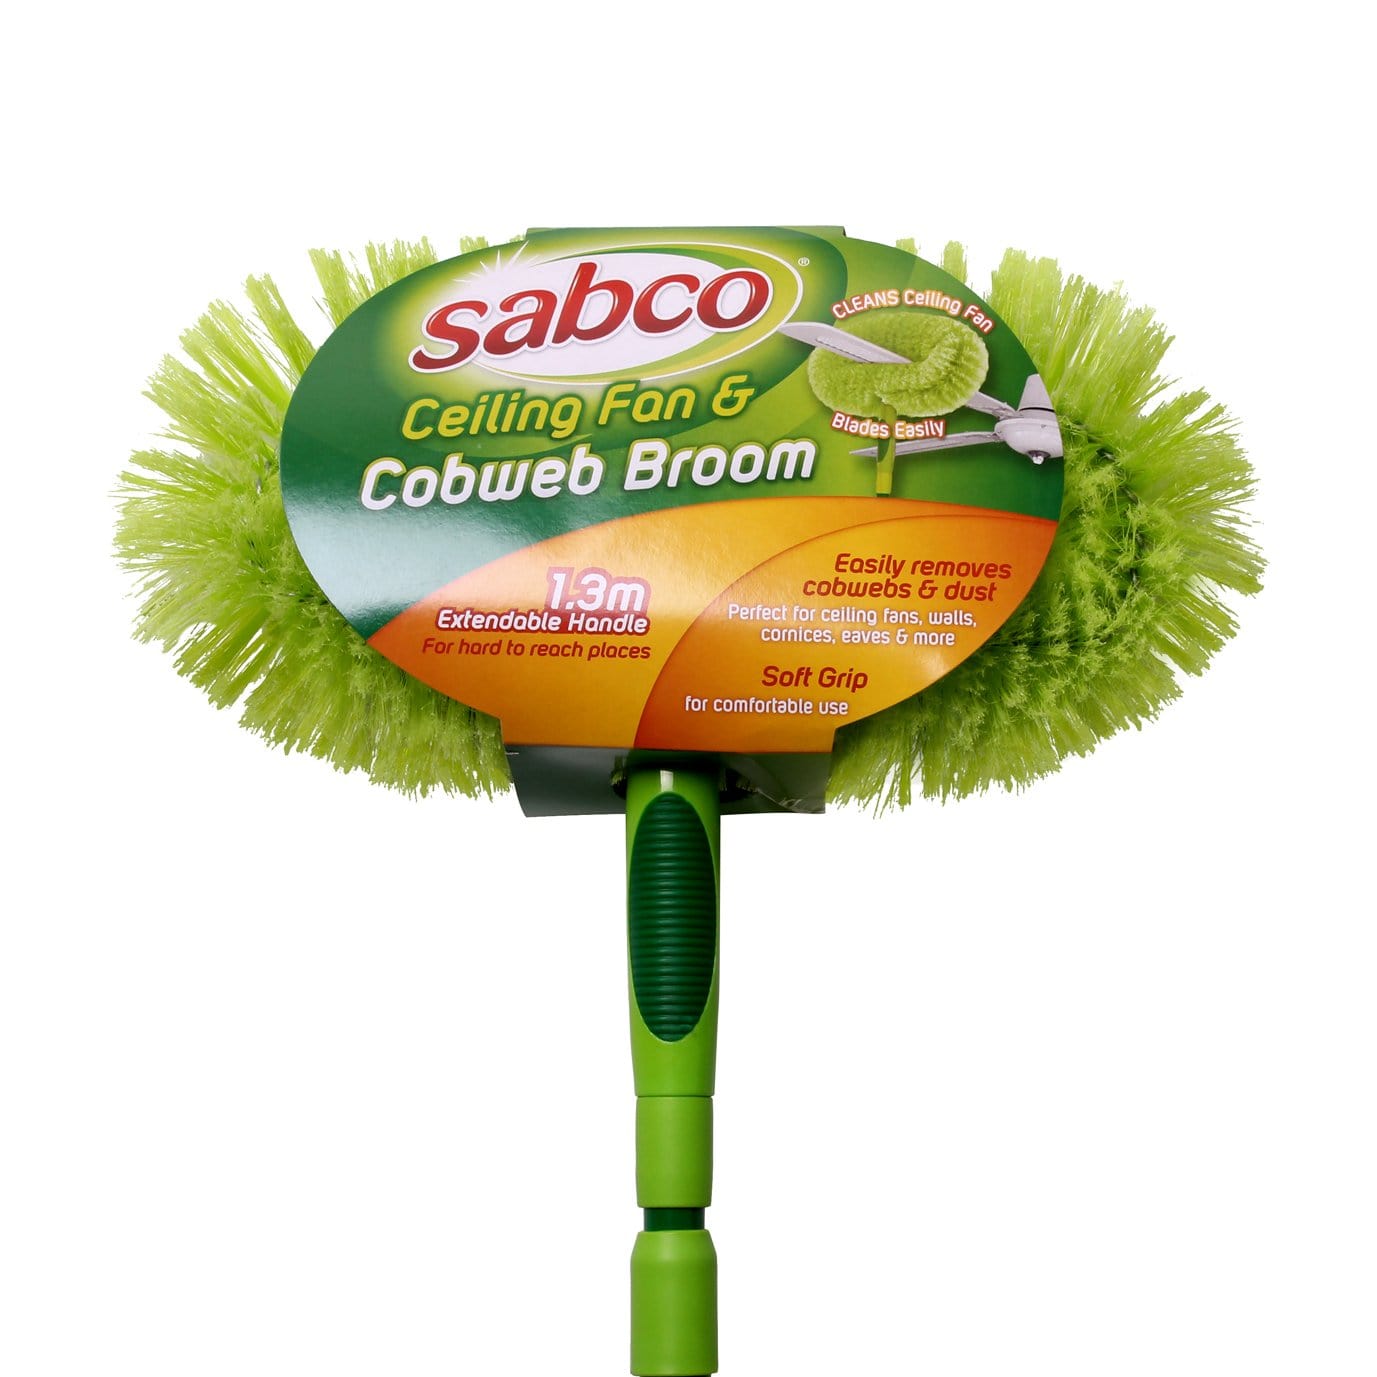 Ceiling Fan and Cob Web Broom Duster